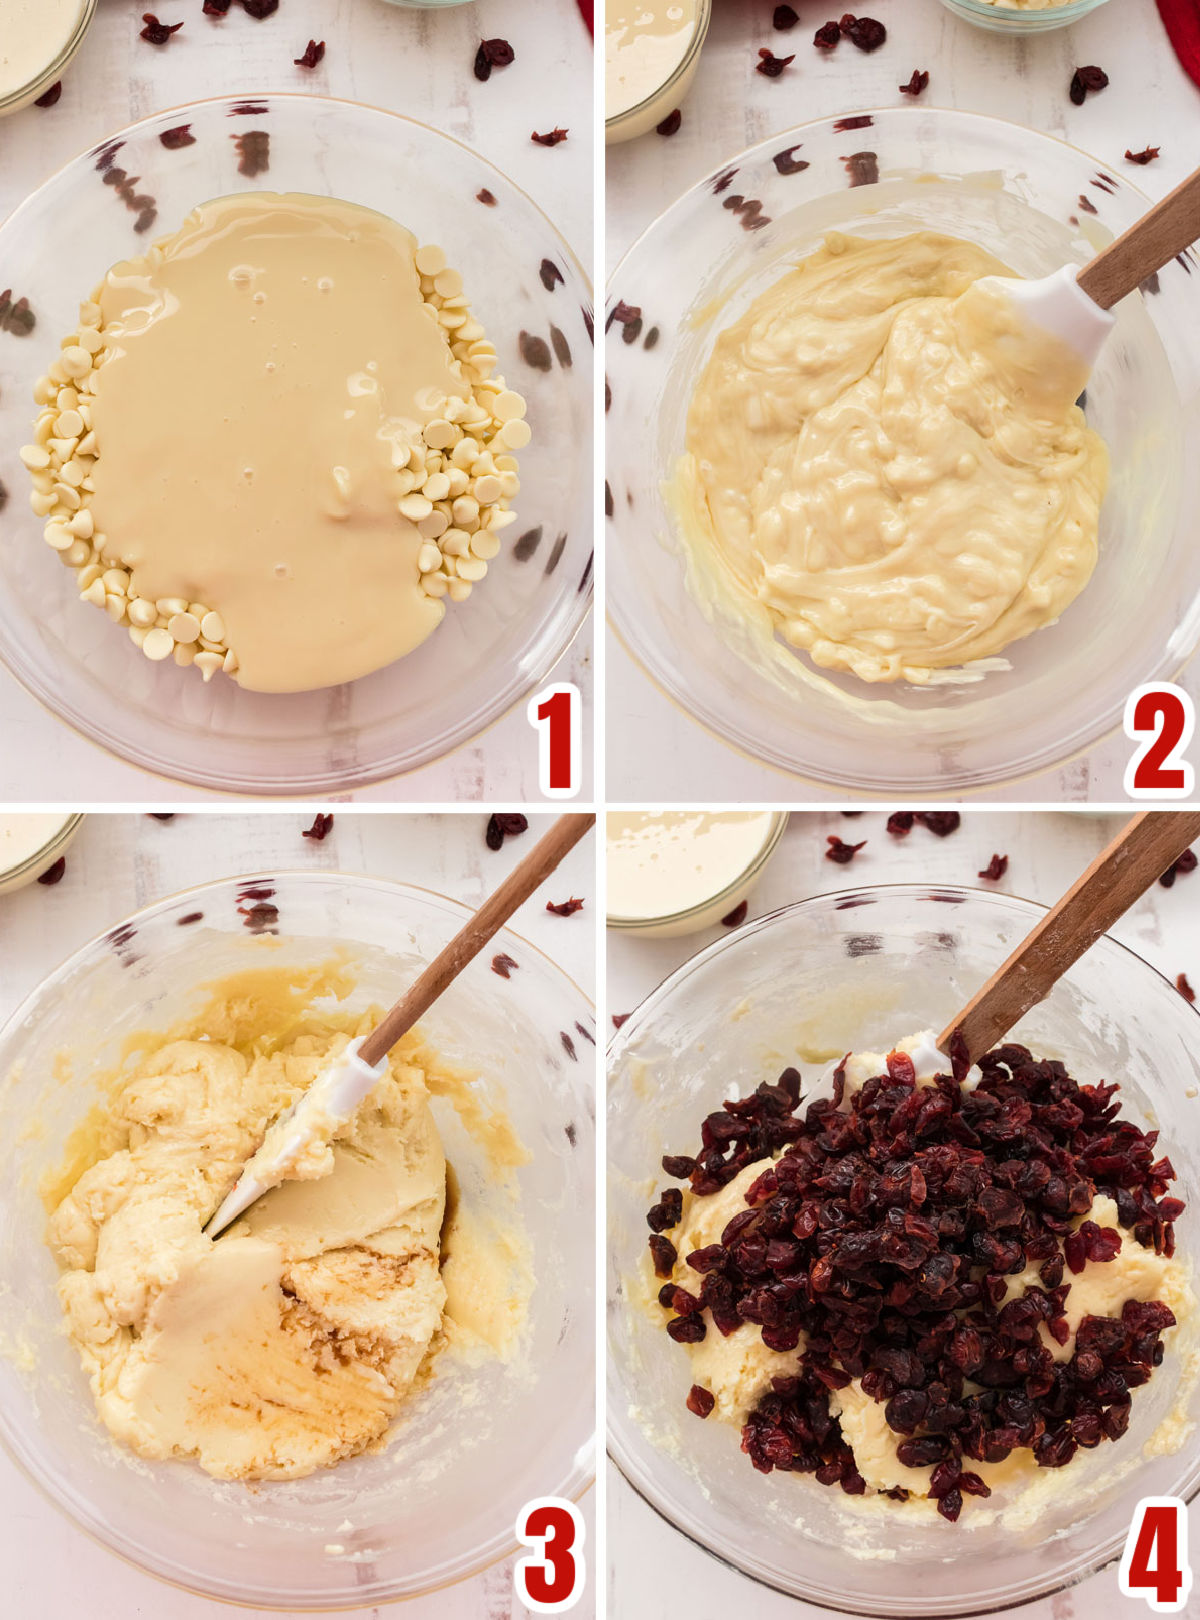 Collage image showing how to make the White Chocolate Fudge.